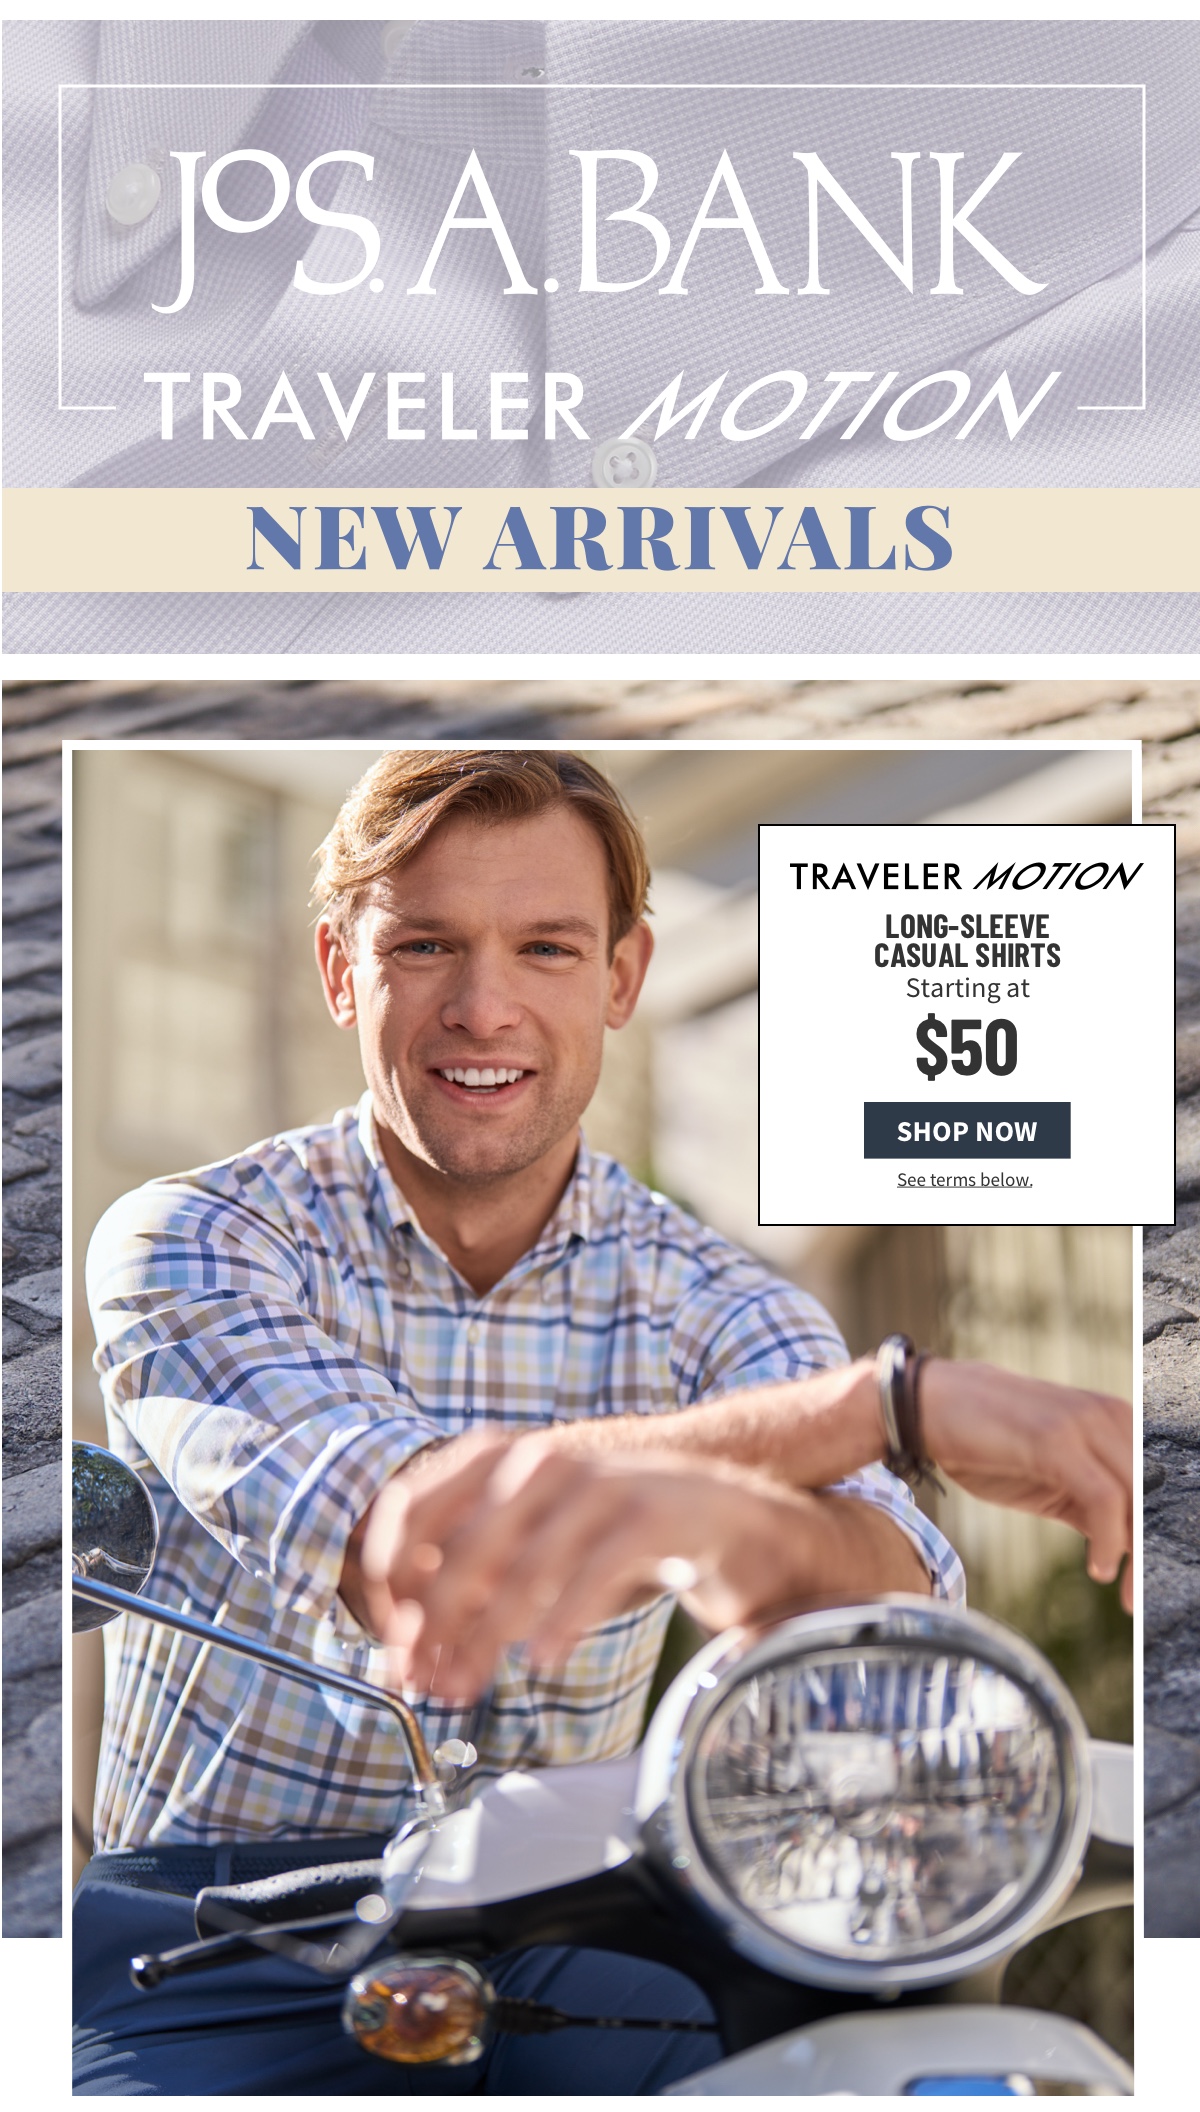 Traveler Motion New Arrivals Traveler Motion Long-Sleeve Casual Shirts Starting at $55 Shop Now See terms below.